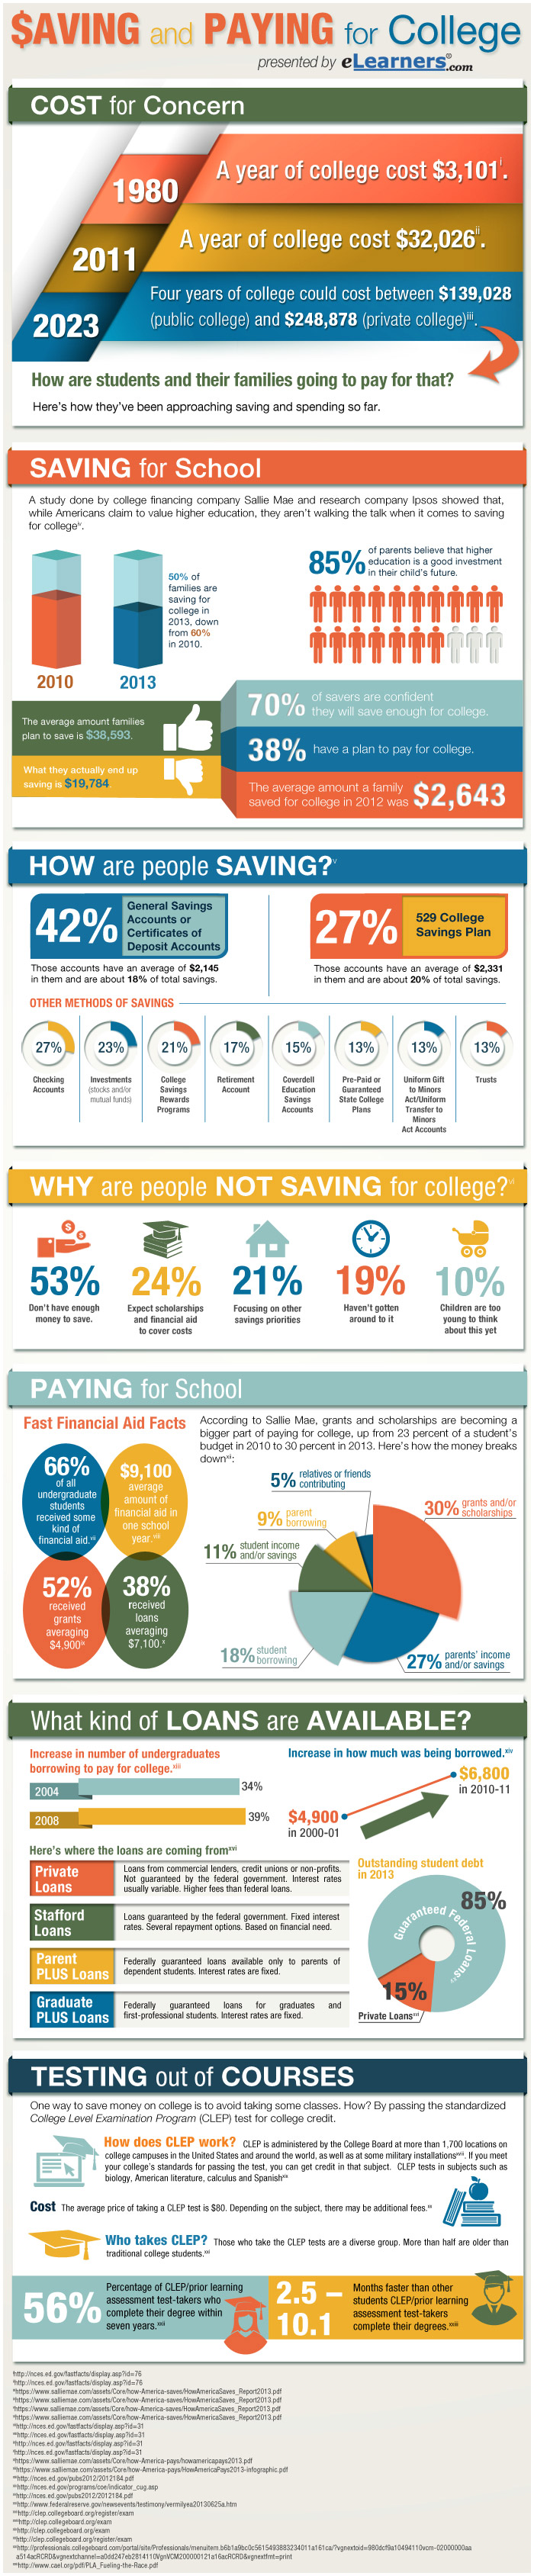 how to pay for college - Saving and paying for college